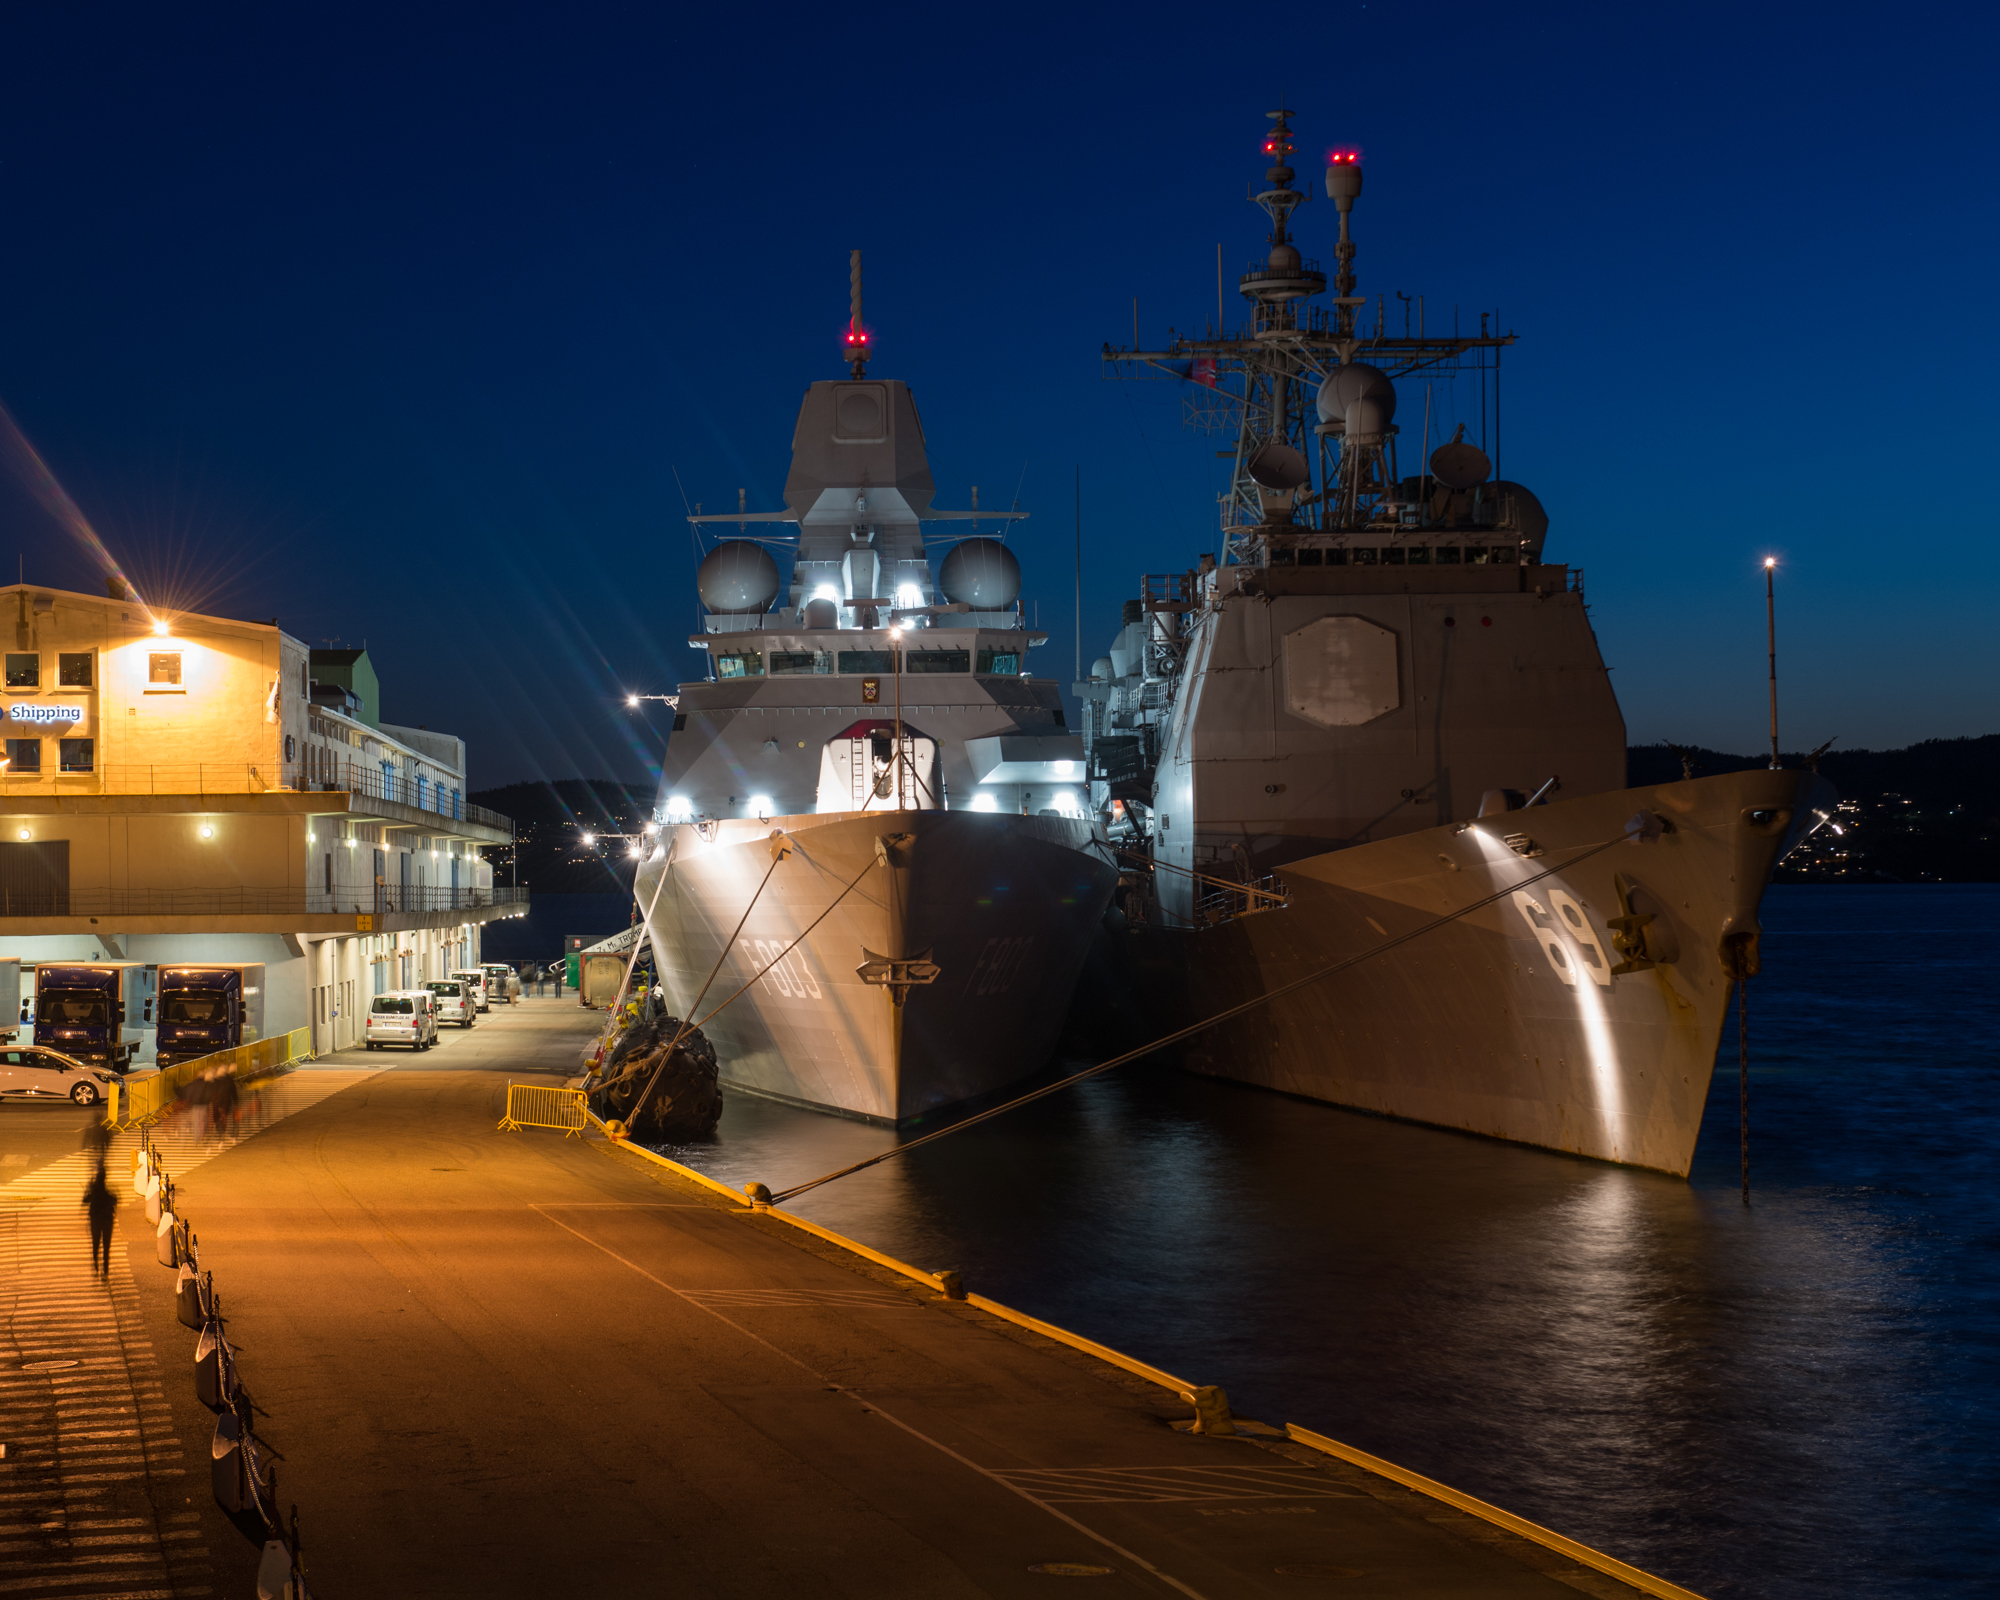 Exercice Dynamic Mongoose - Hnlms Tromp (F803) and USS Vicksburg (CG69) in Bergen harbour - 2 may 2015 © FSGT Artigues